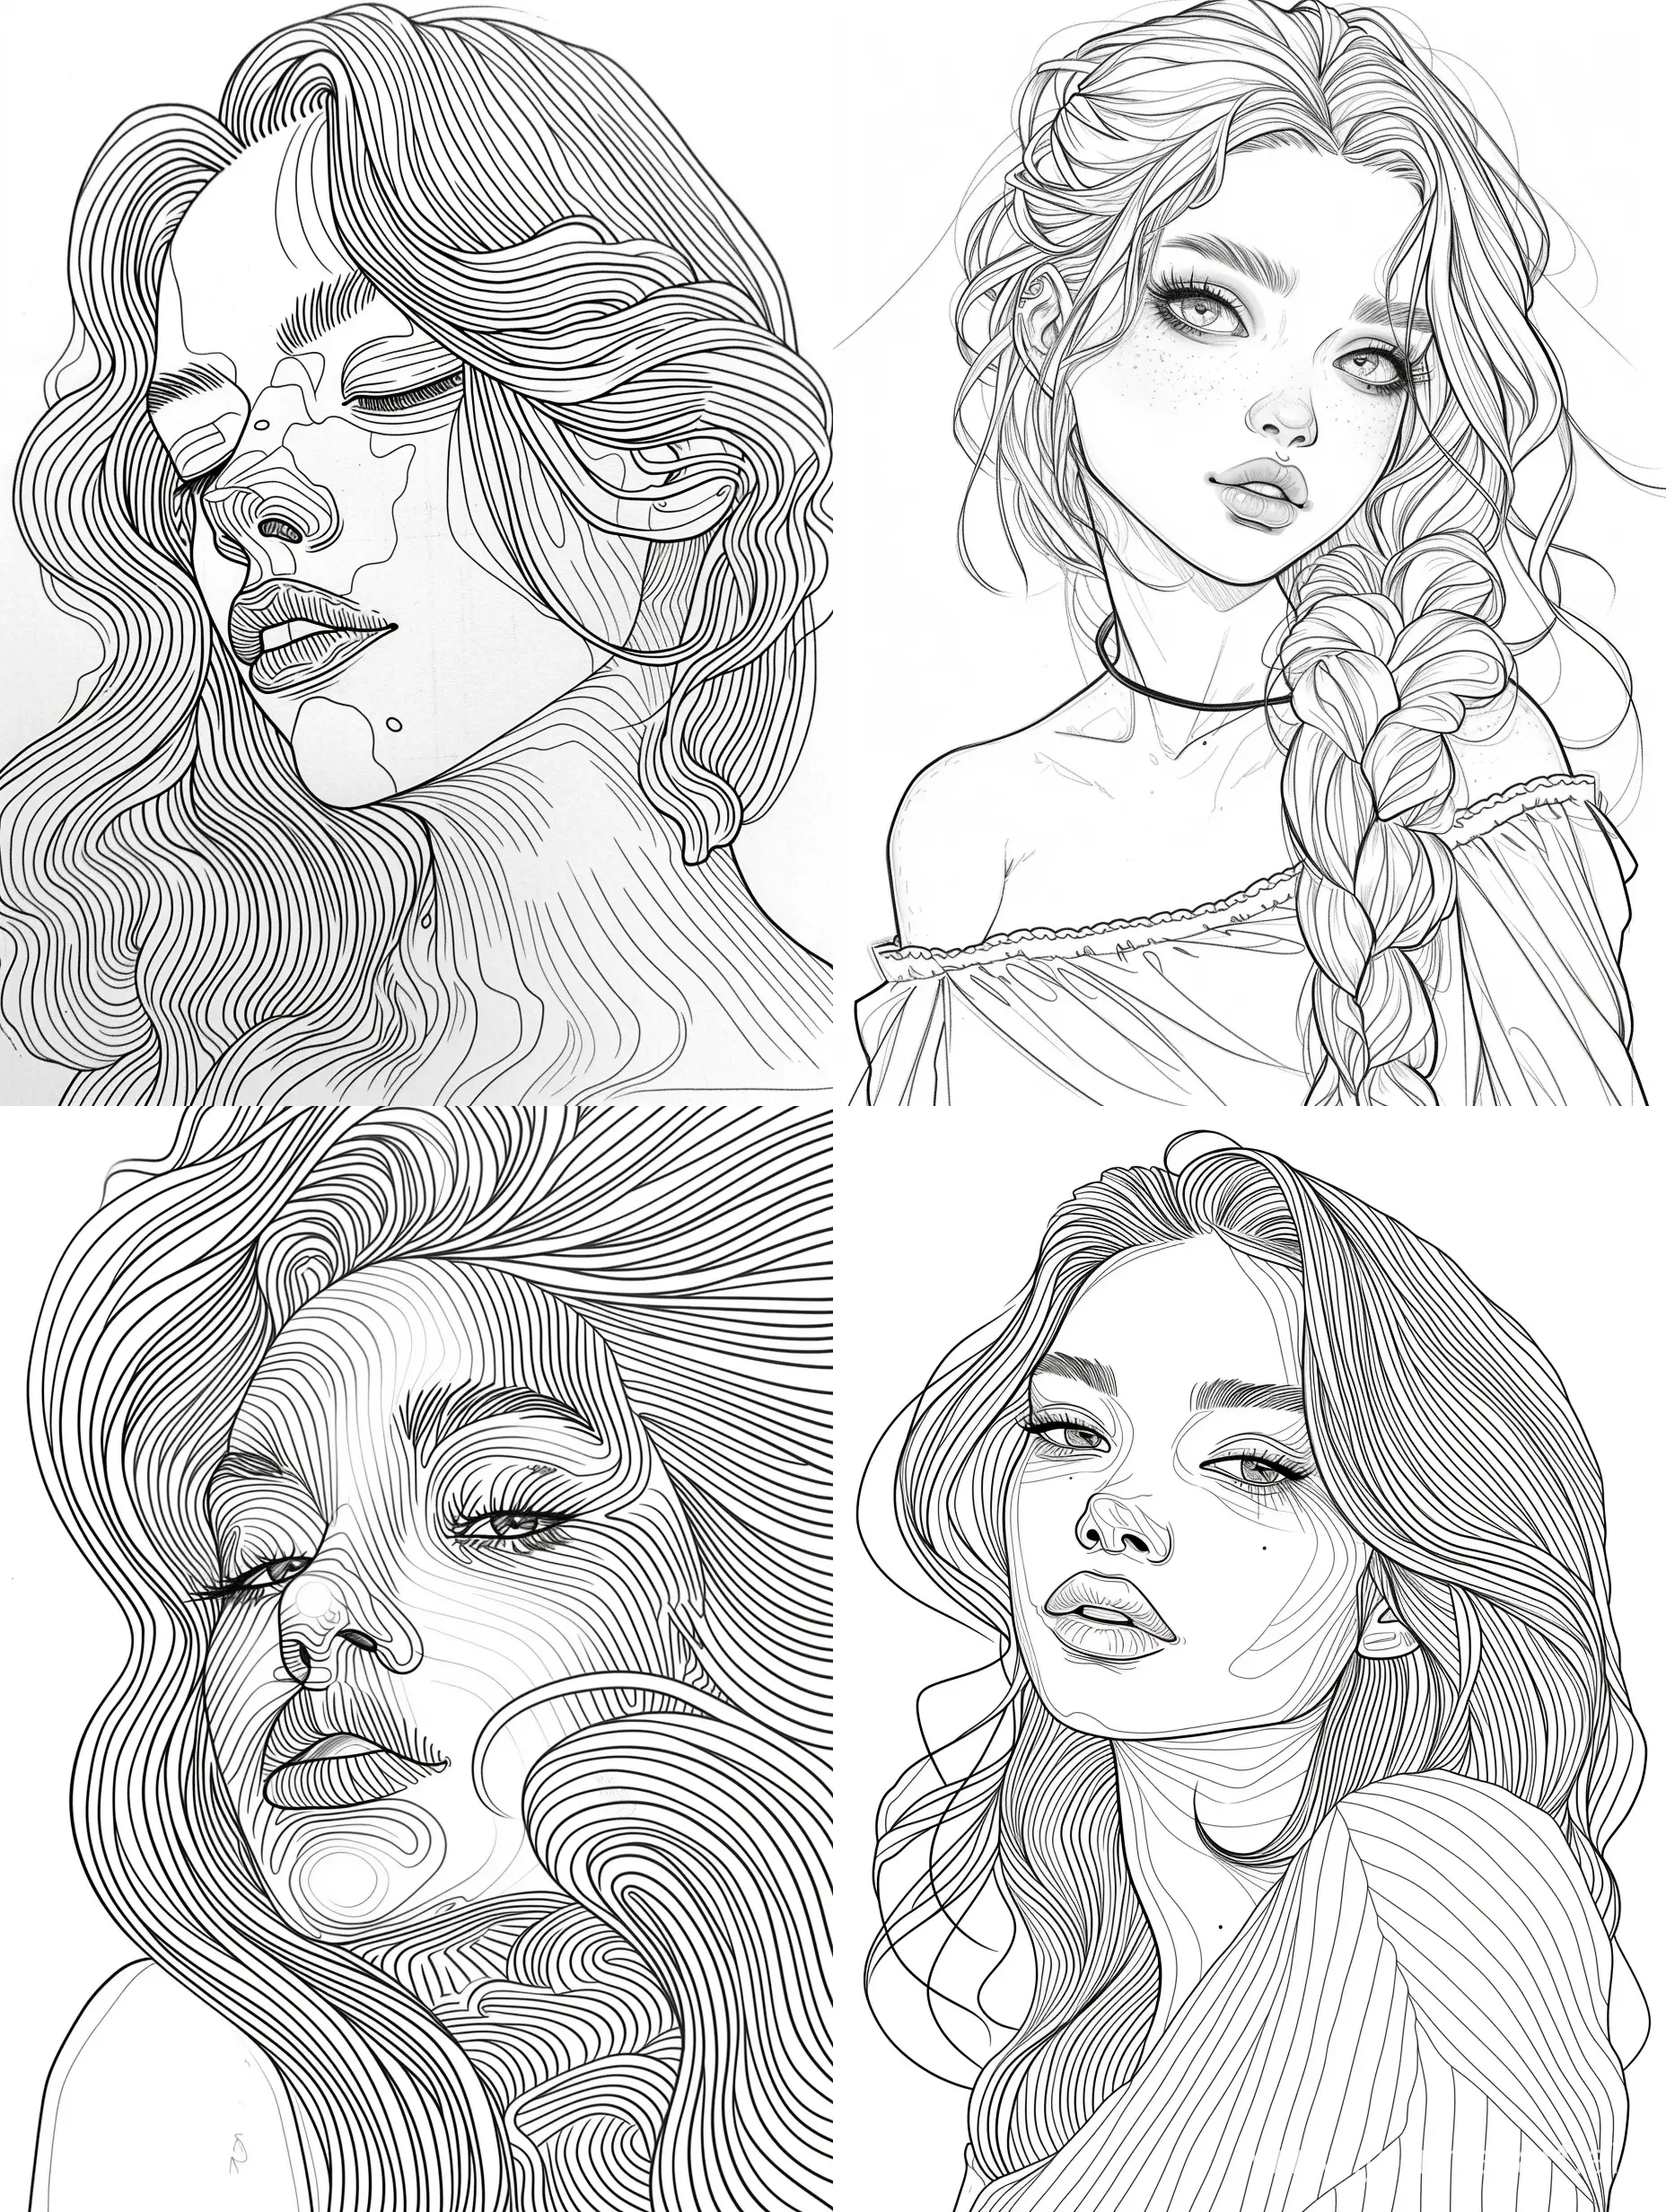 (((in the style of bearbrickjia))), creative art drawing, fashionable art girl, fine lines, white background, art, black and white coloring, black and white image, black and white linear image, coloring page, (((black and white))), line art